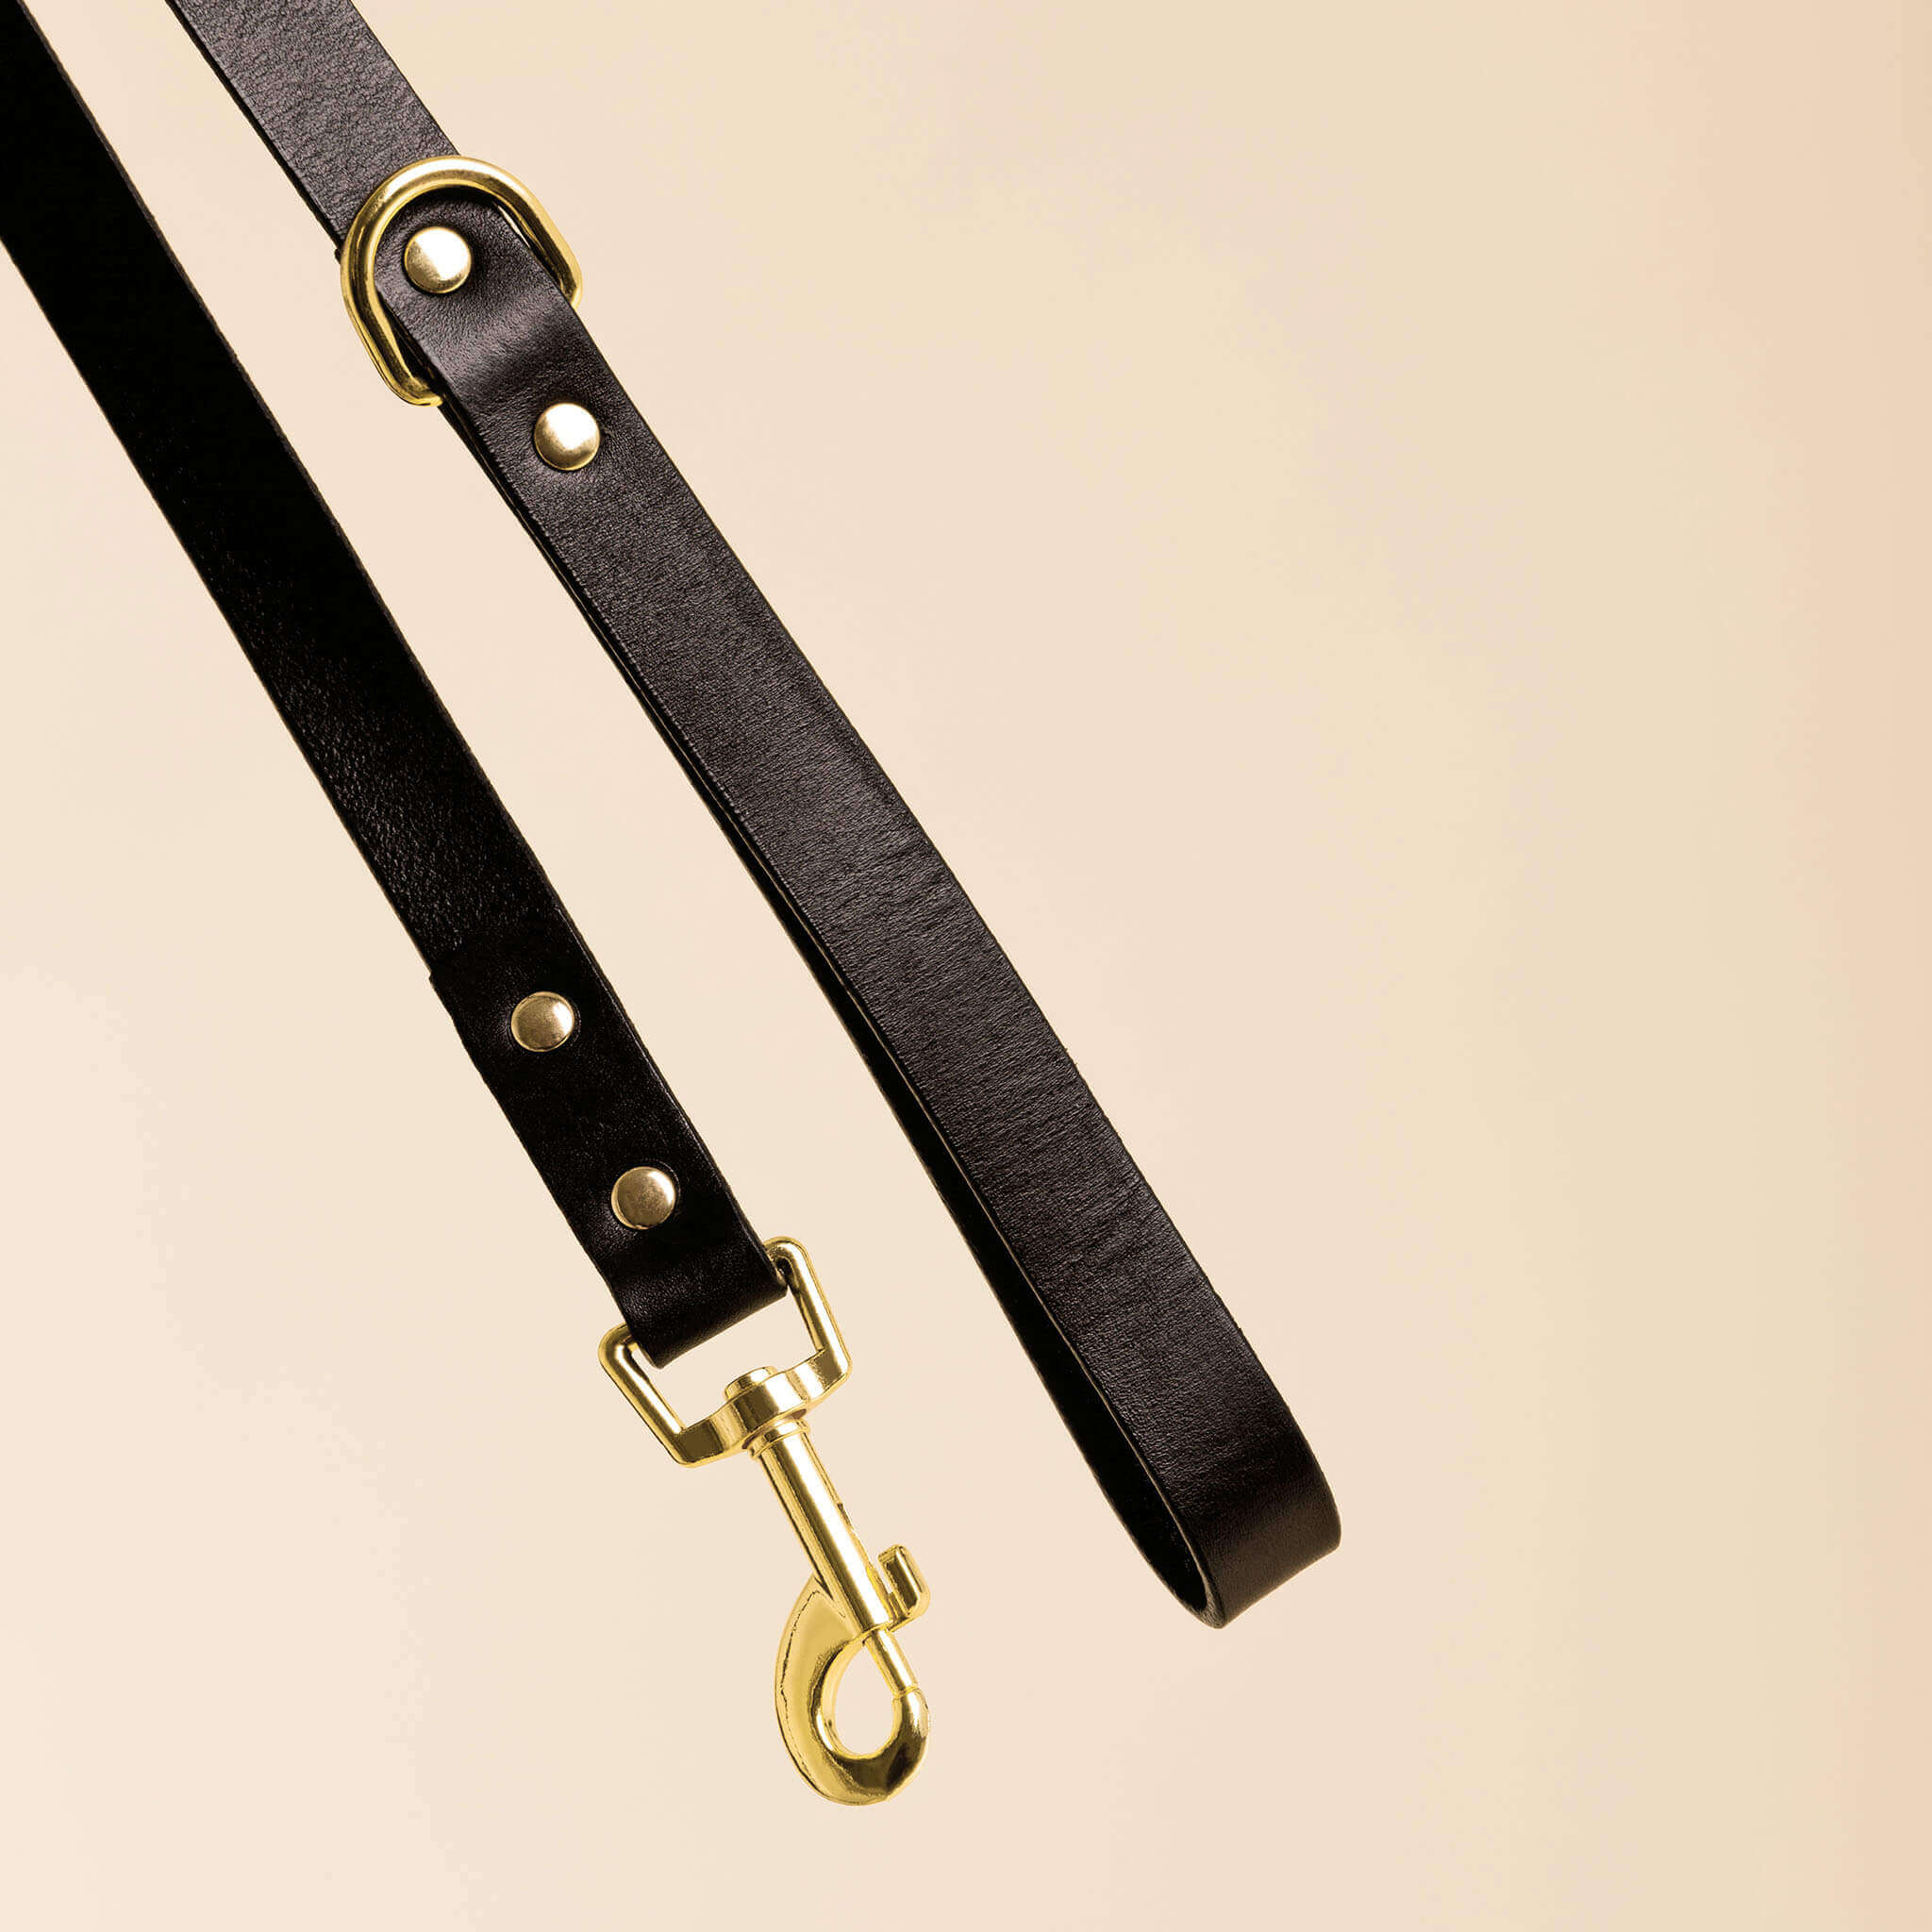 Leather Dog Leash in Sable Black